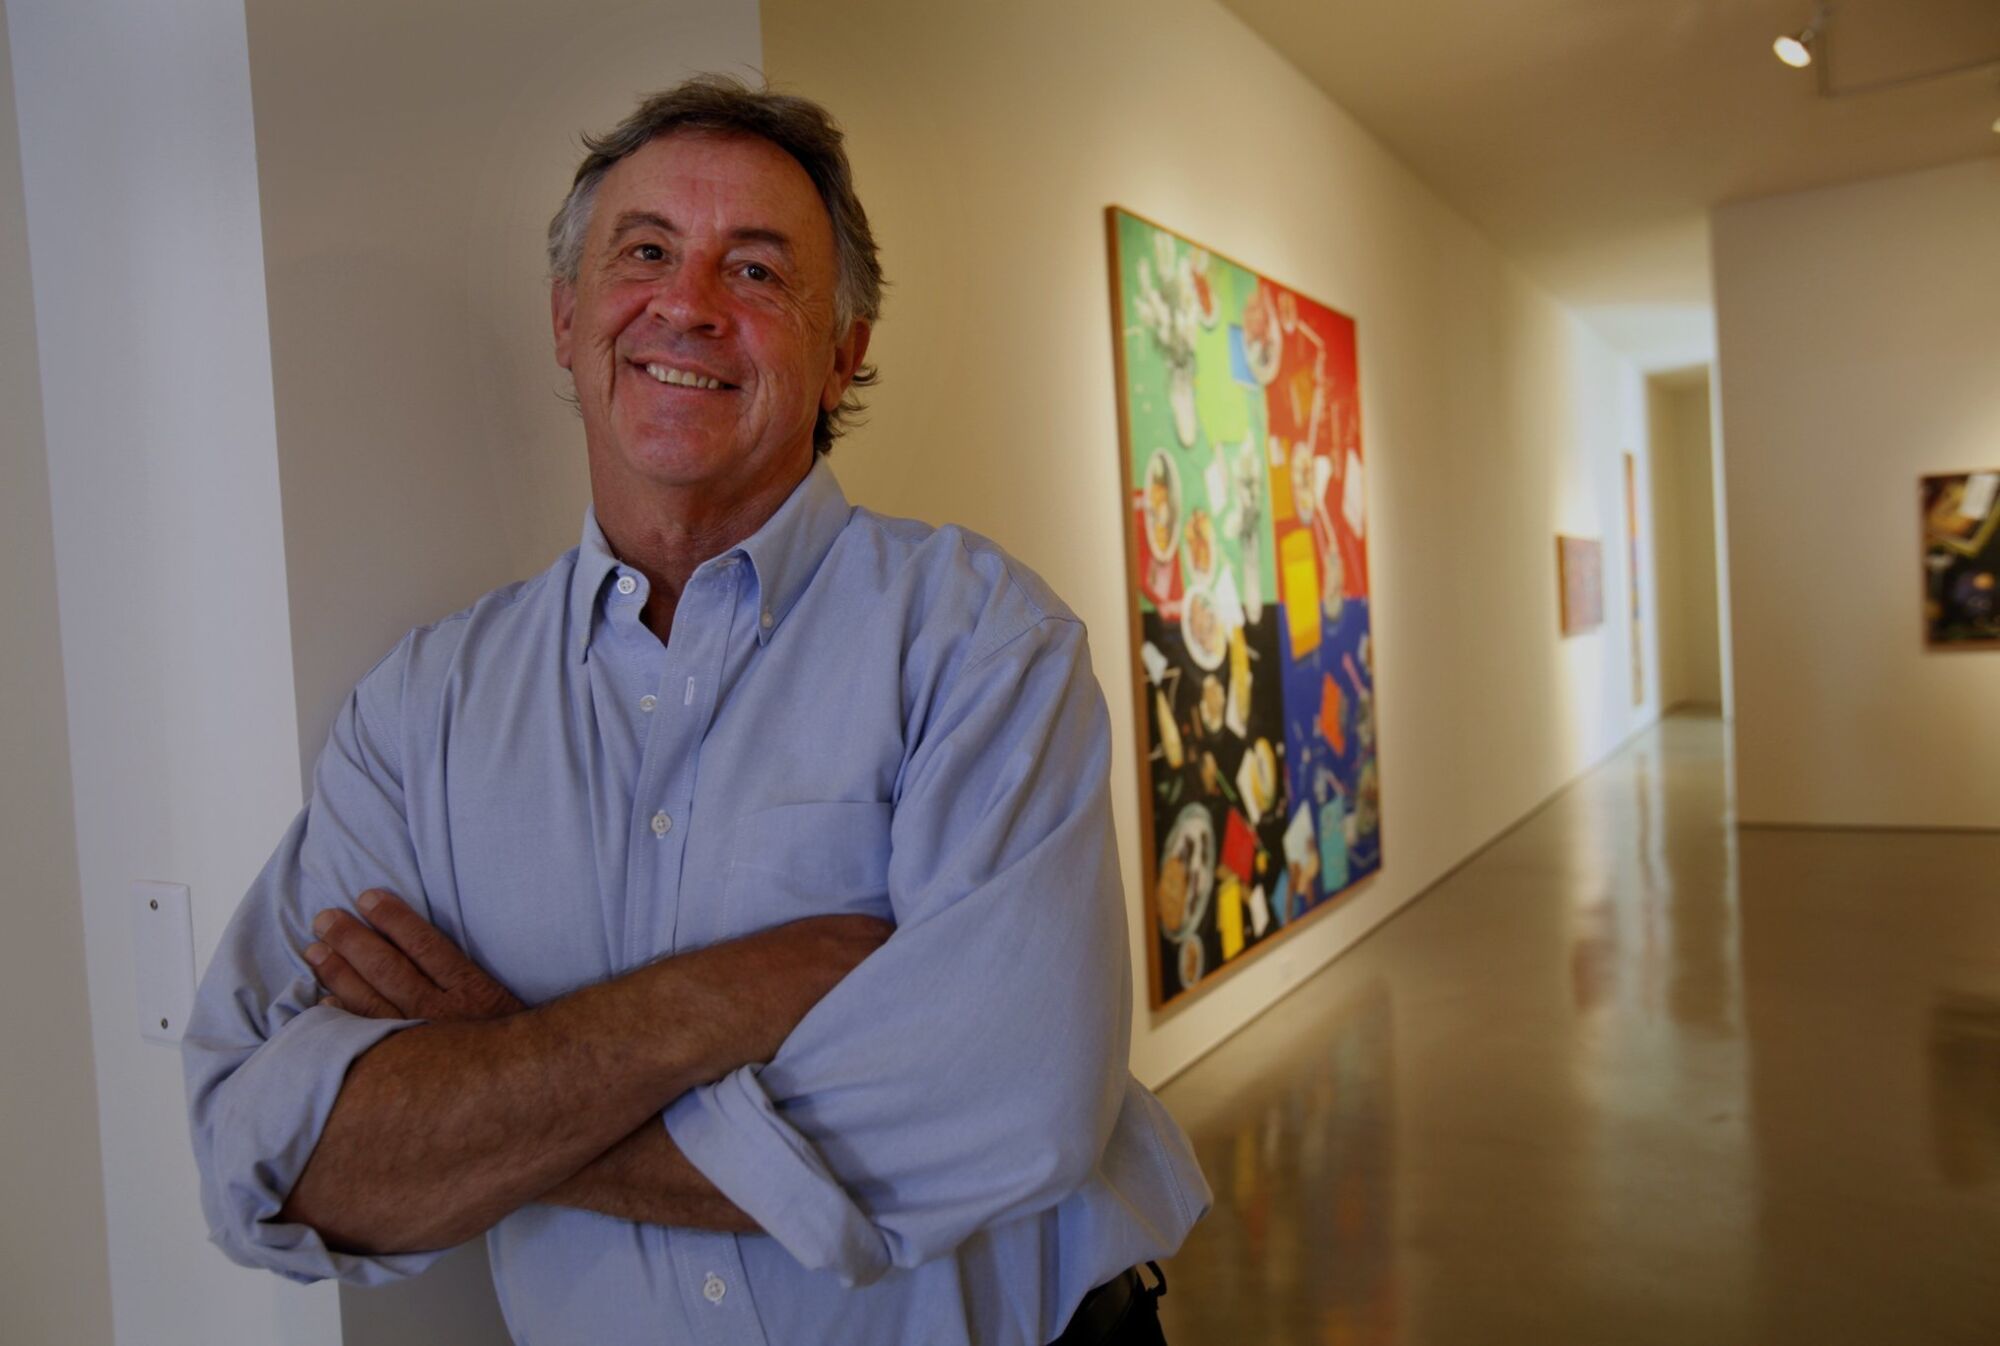 Gallery owner Mark Quint has opened a new art gallery on Girard Avenue in La Jolla. 